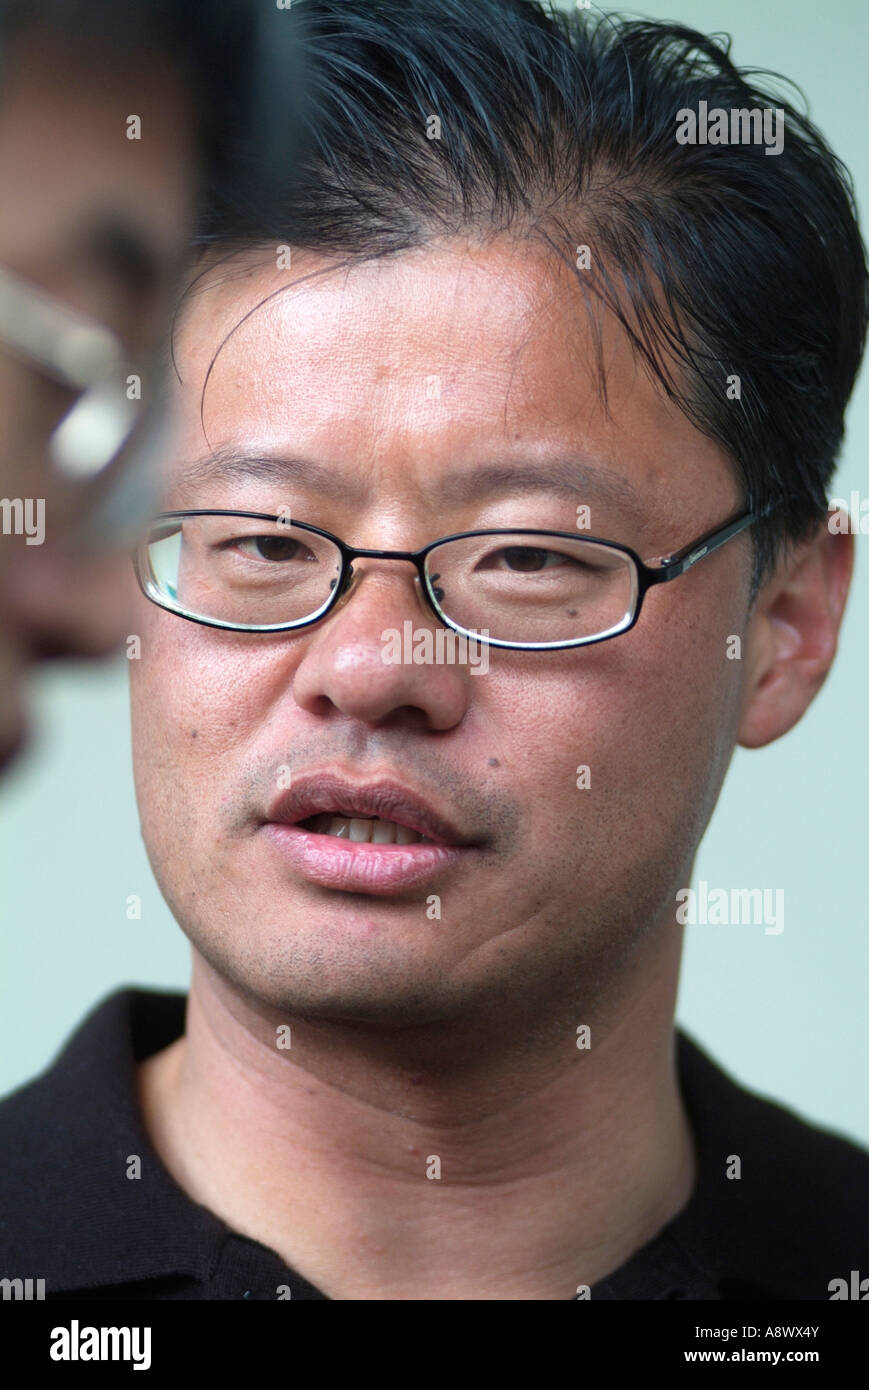 Jerry Yang Co-Founder and CEO of Yahoo Inc talks with a co worker in Silicon Valley CA Photo by Chuck Nacke Stock Photo